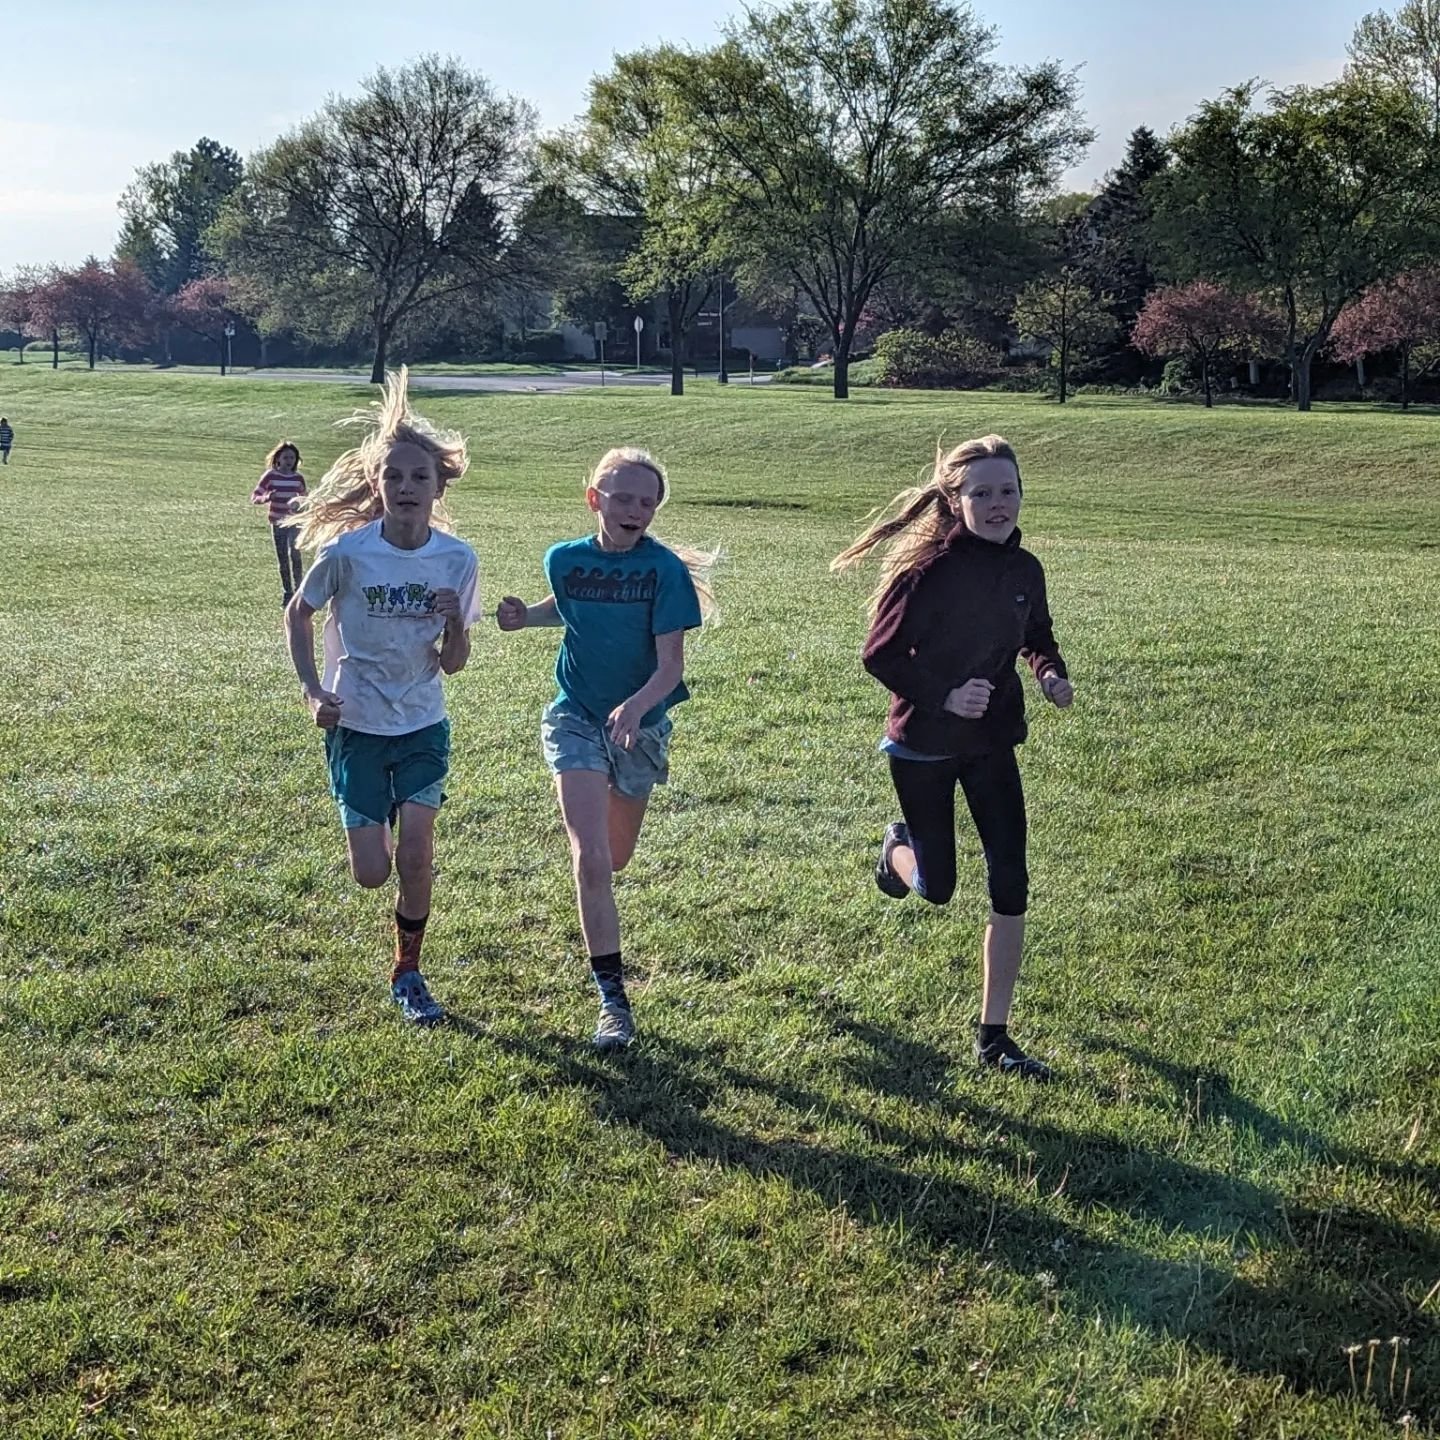 🏃&zwj;♂️ Rise and shine, folks! 🌞

How do you start your day?

At Acton, every morning, we kick things off with a morning run!

There's something invigorating about breathing in the crisp morning air and feeling the grass beneath our feet. 

It's n